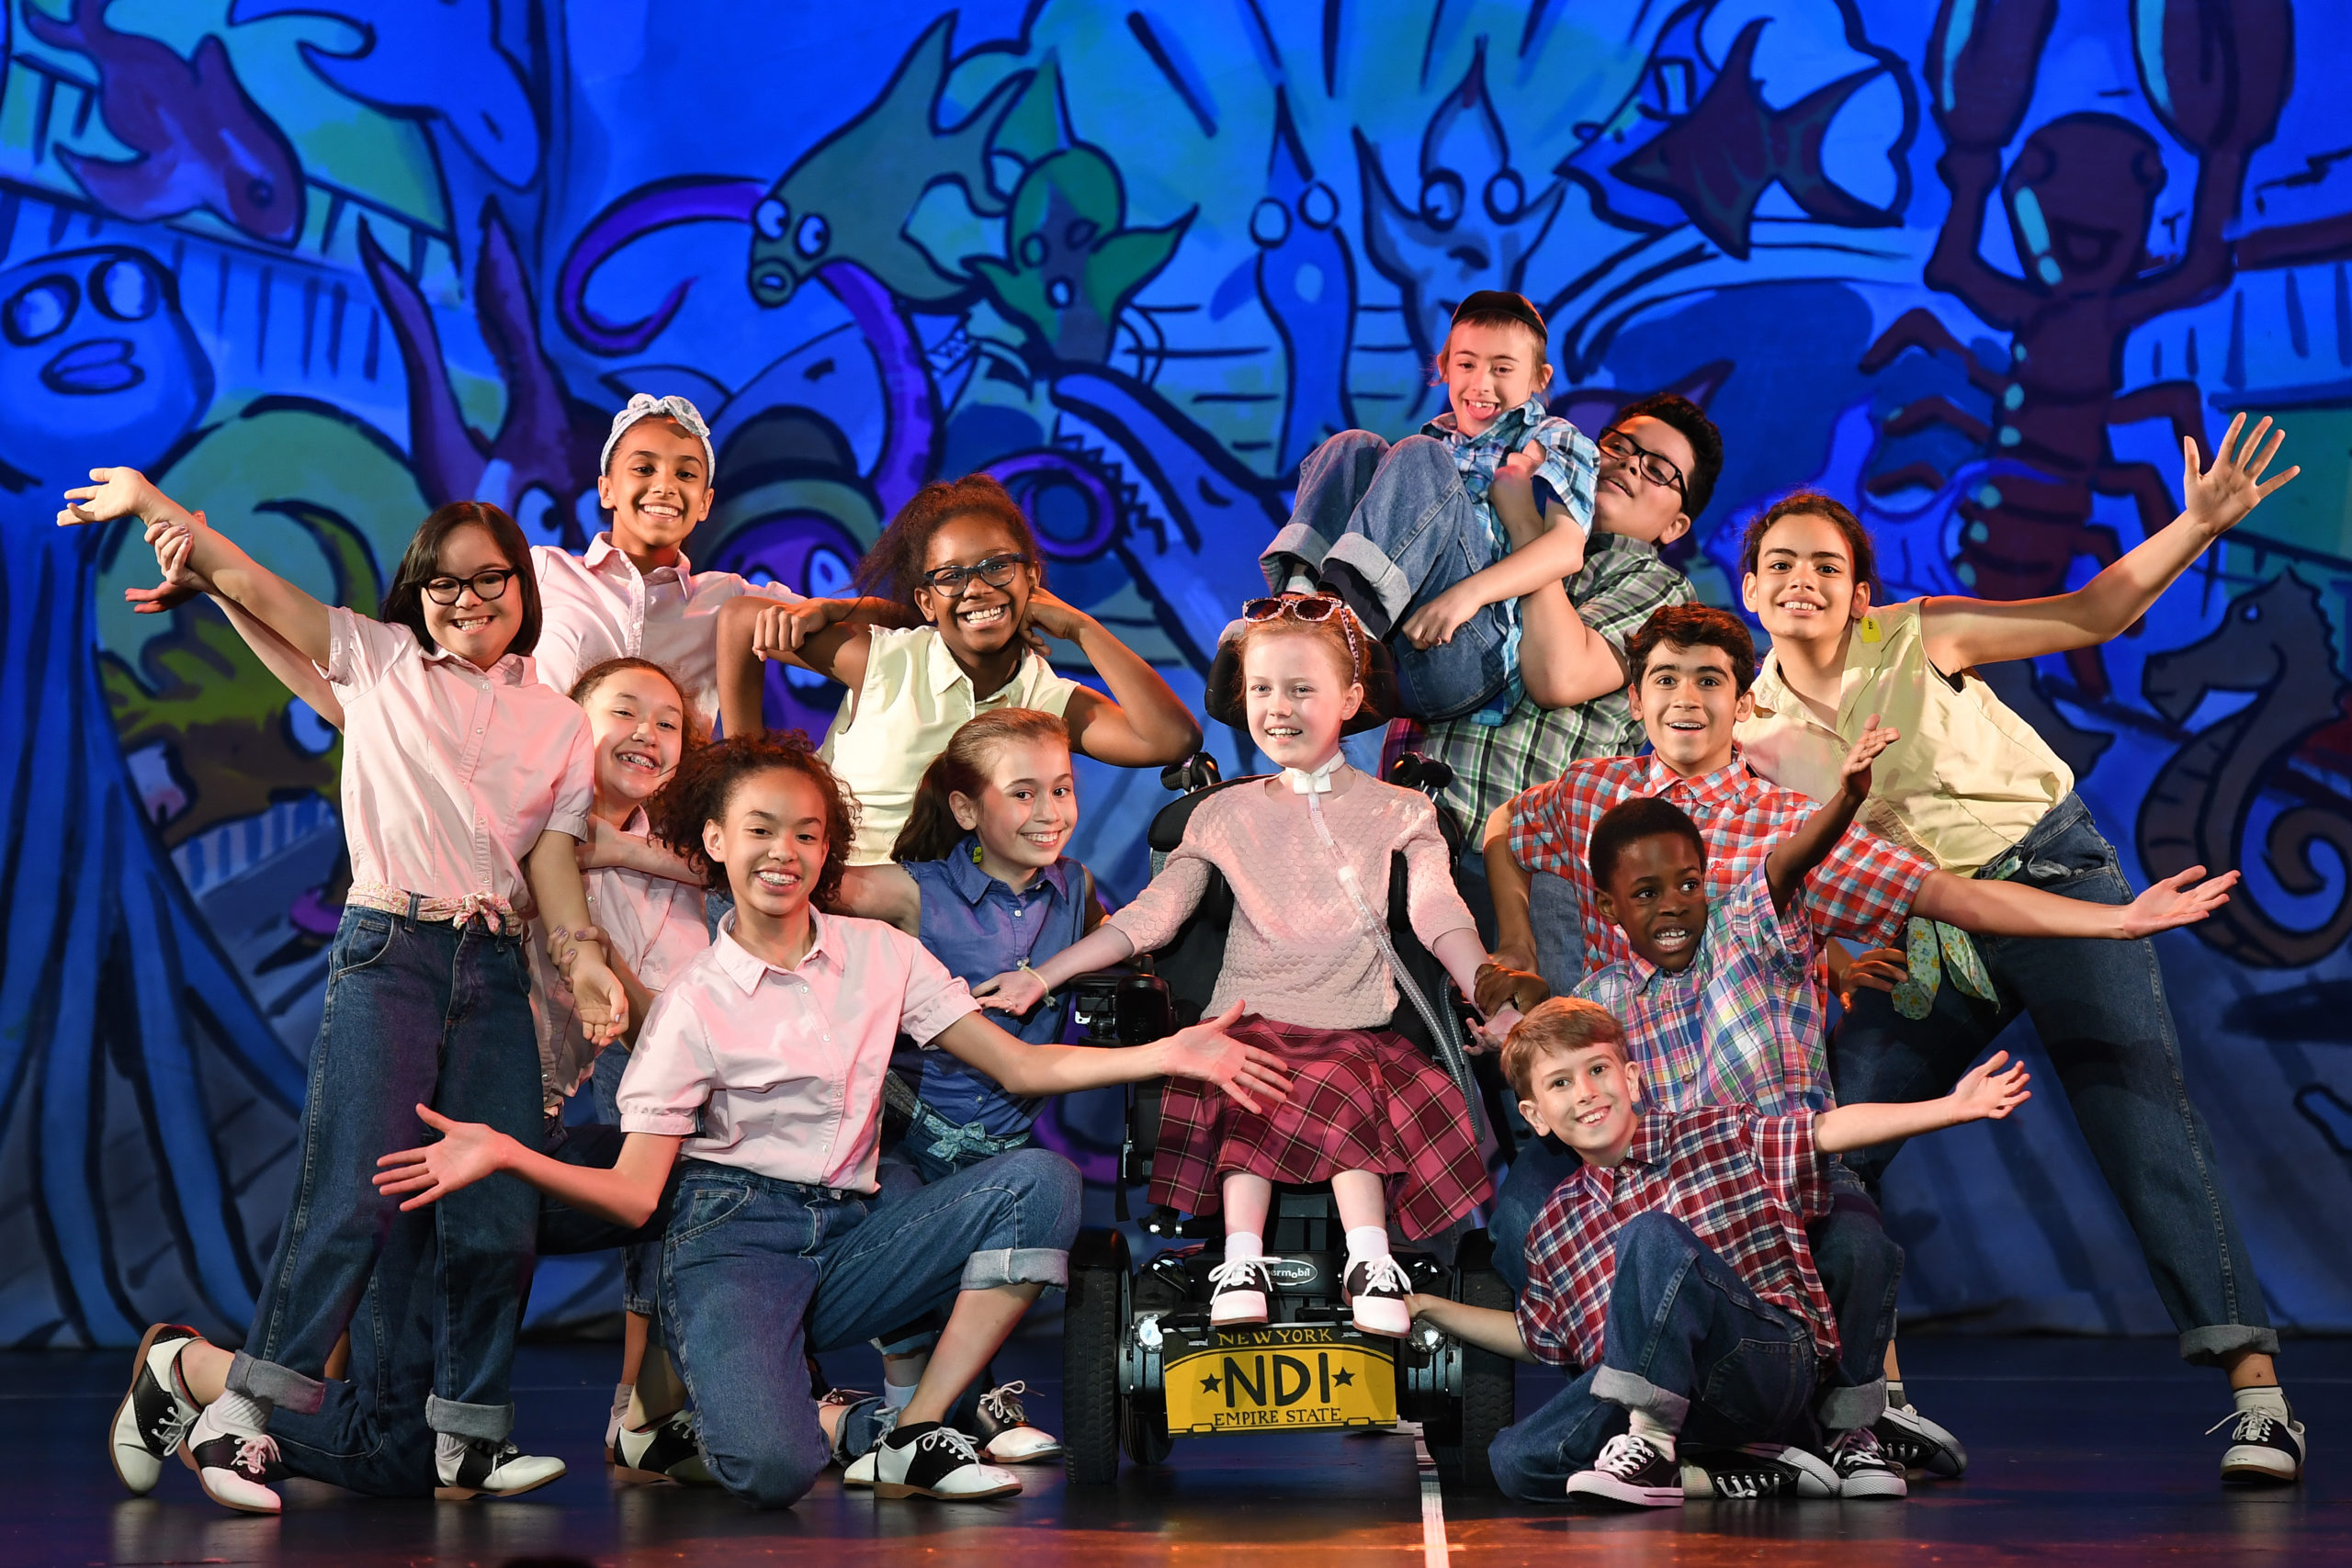 Image of children with all abilities holding a pose on stage